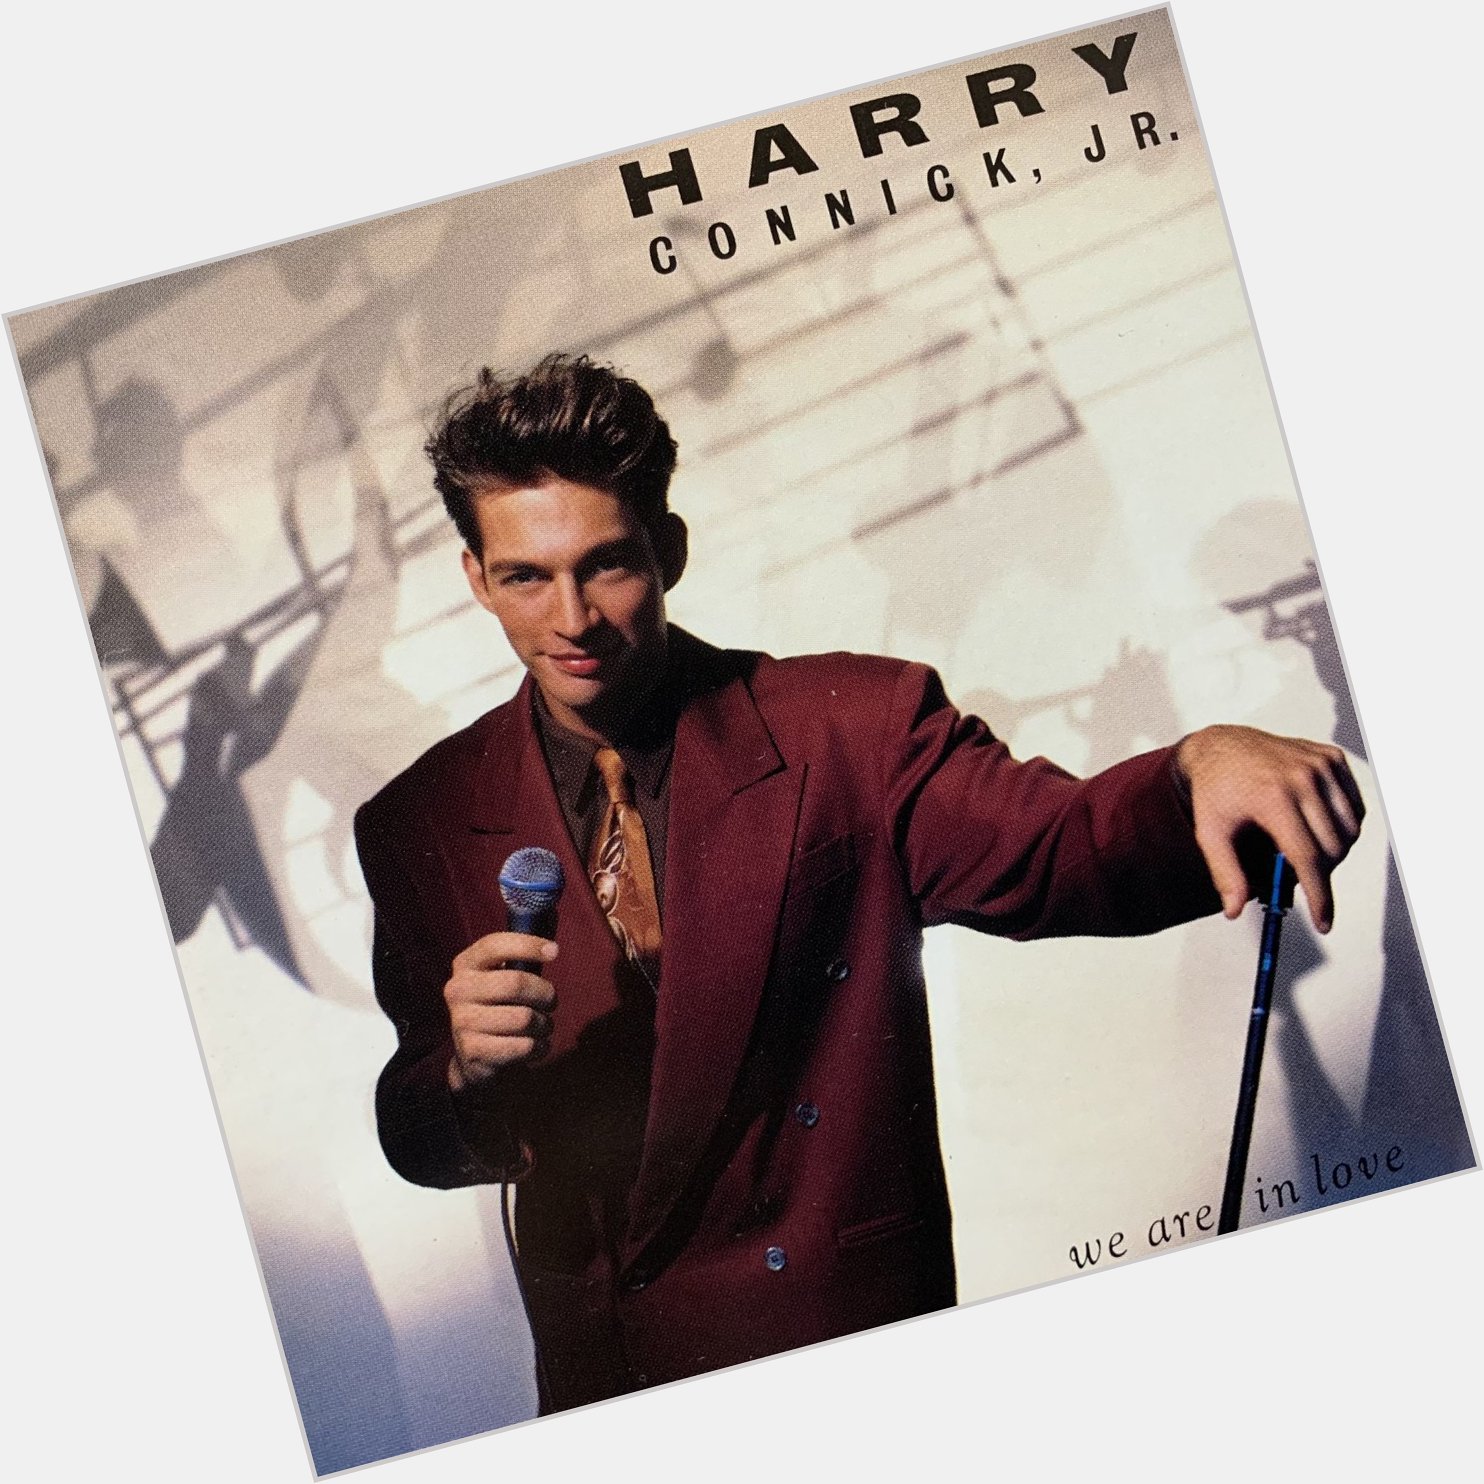 HARRY CONNICK, JR.
WE ARE IN LOVE
Happy birthday   